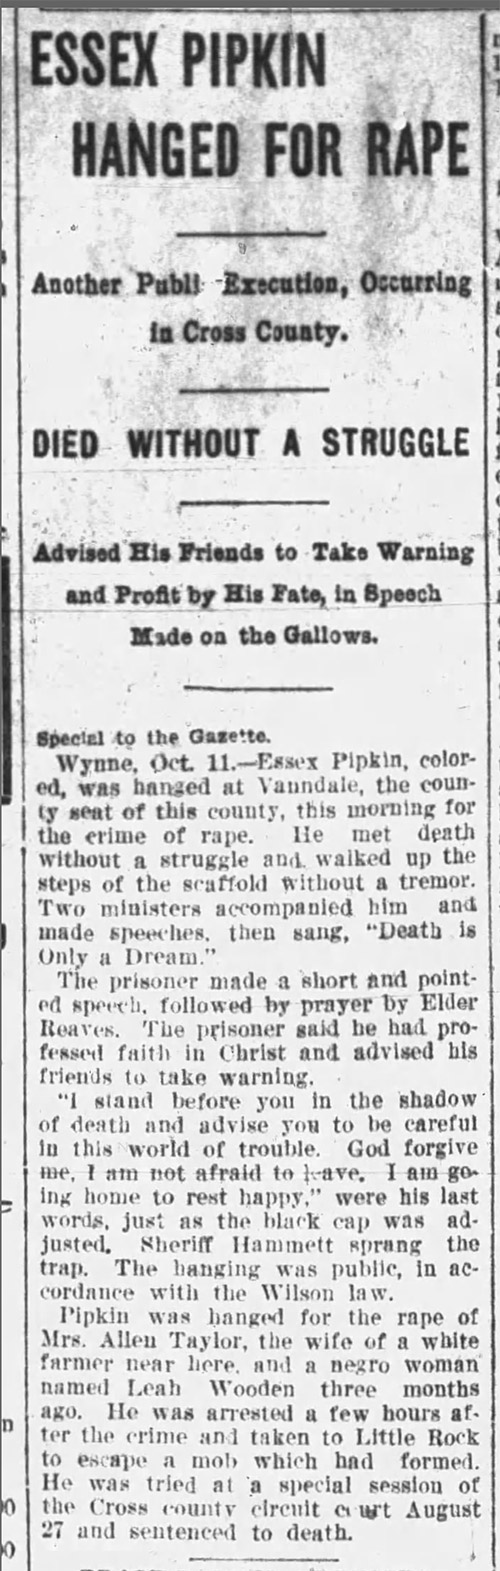 "Essex Pipkin Hanged for Rape" newspaper clipping